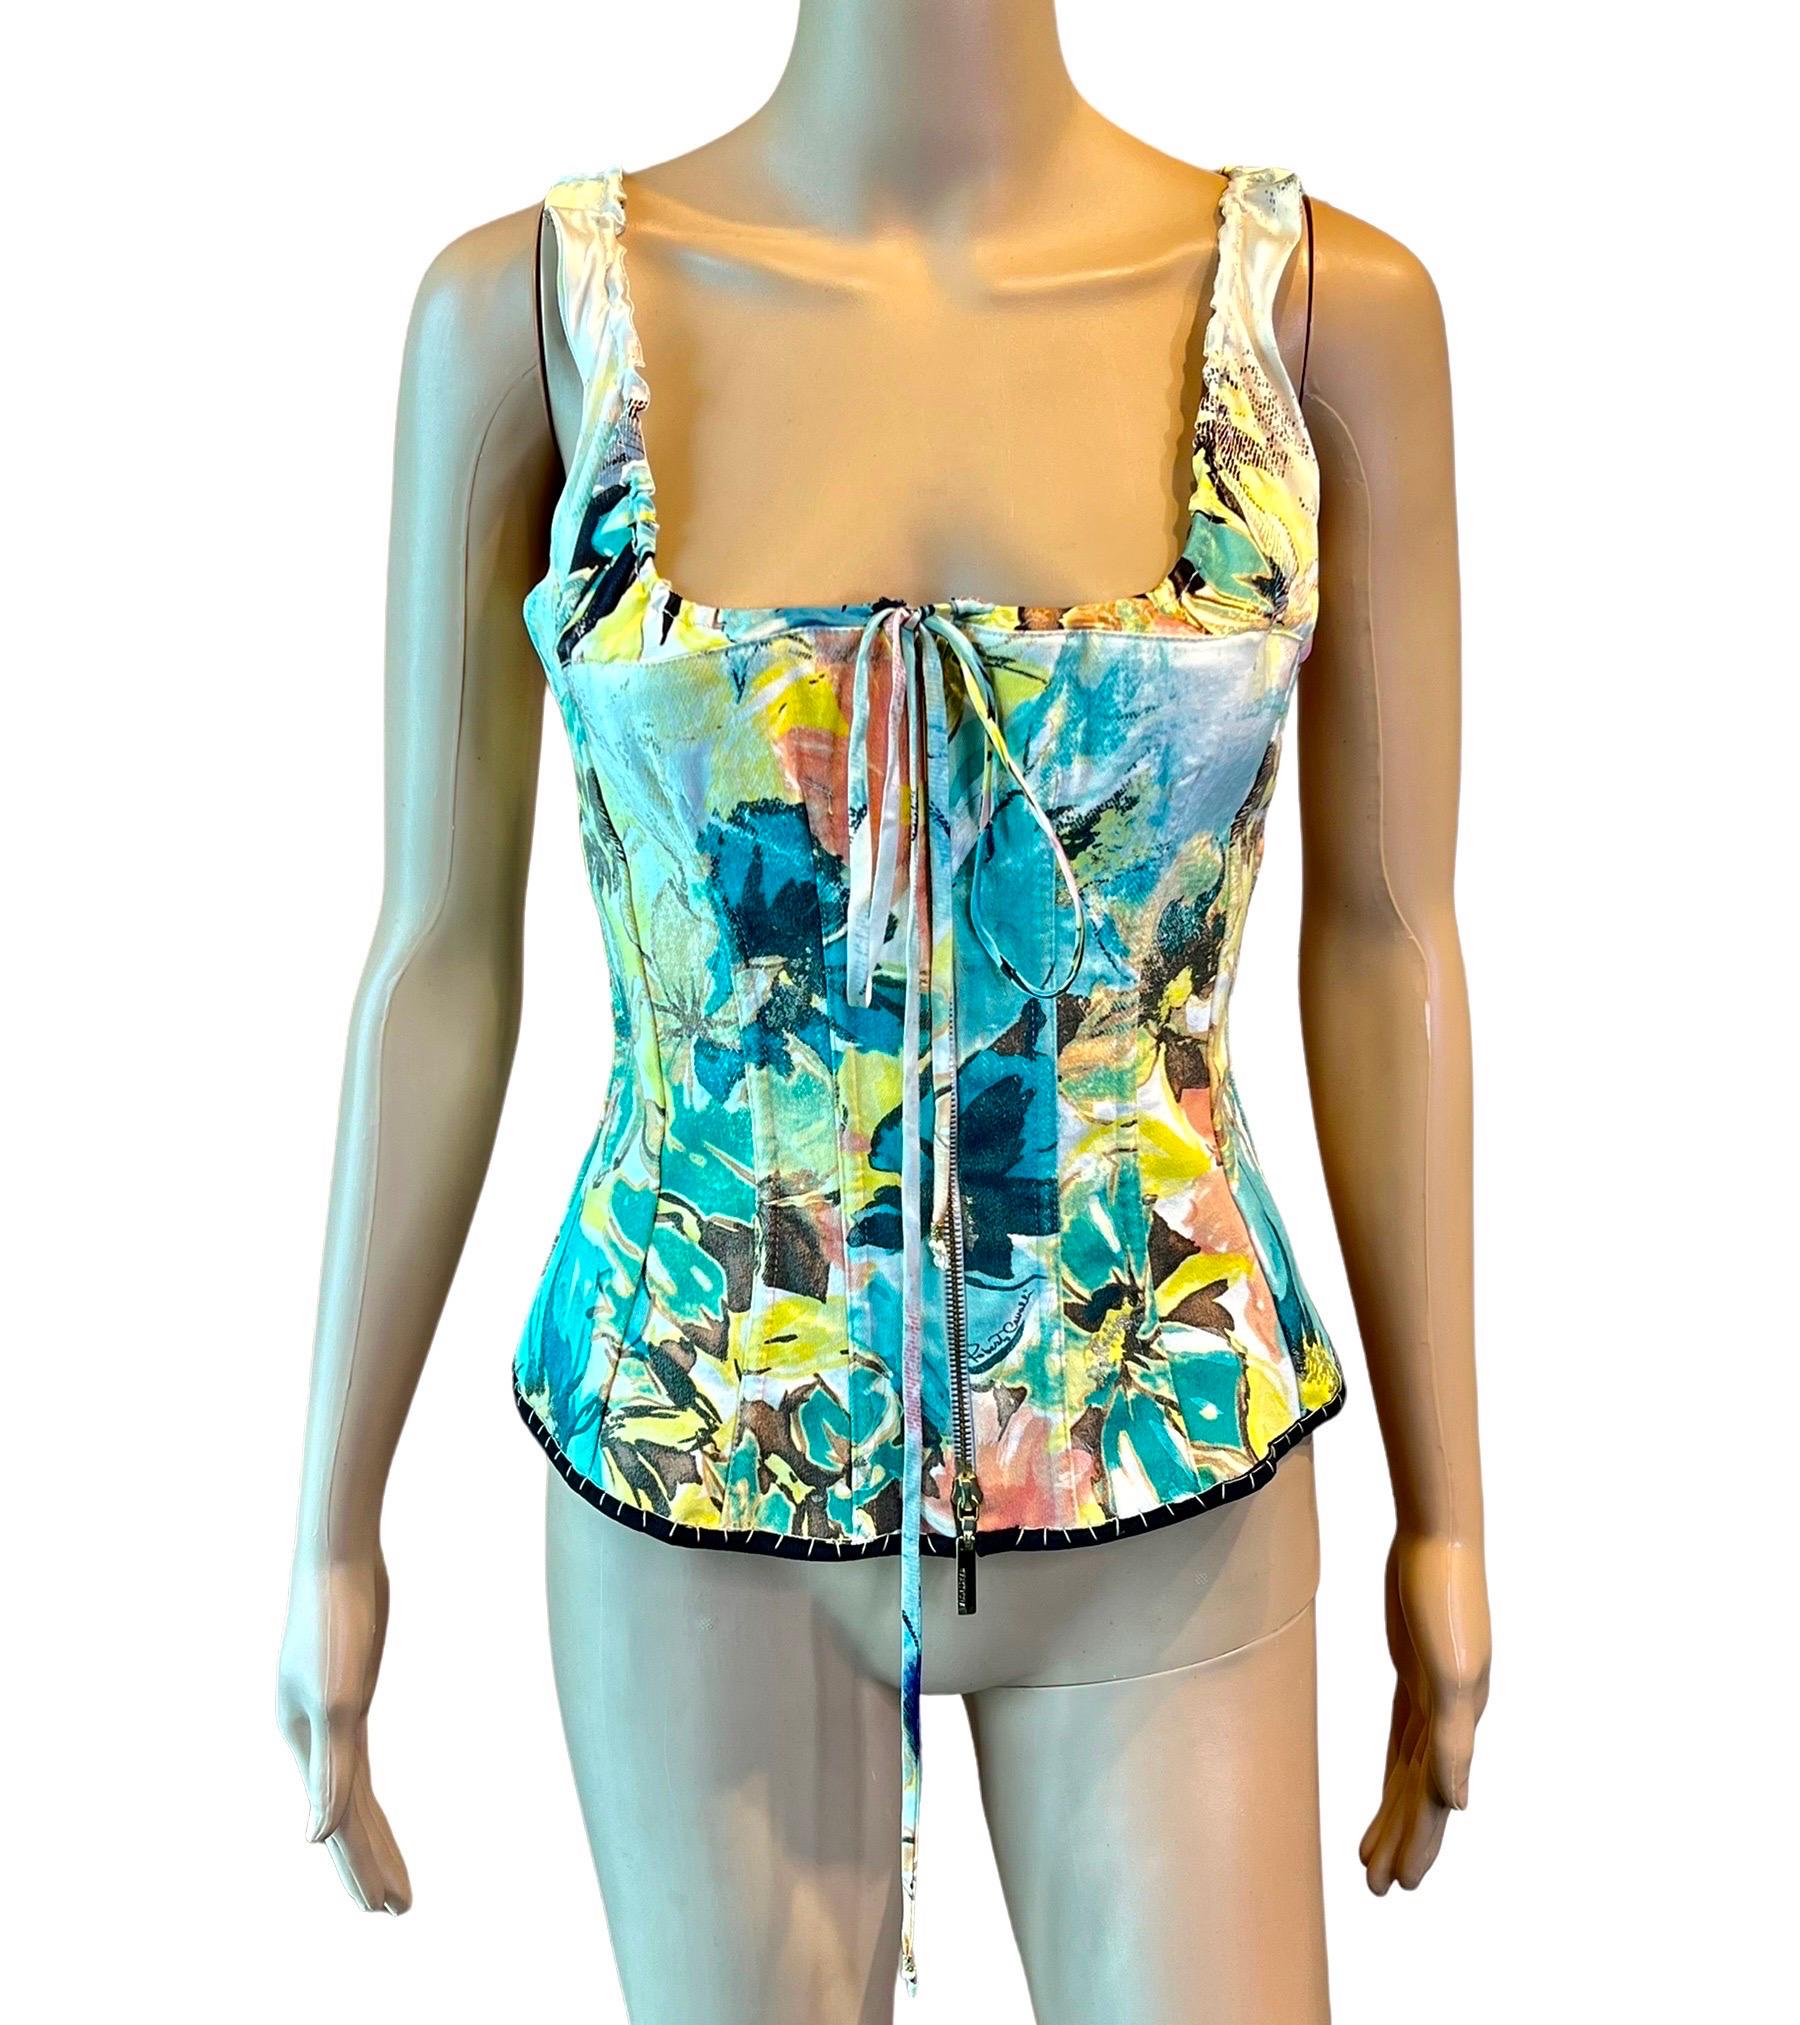 Green Roberto Cavalli S/S 2003 Bustier Corset Floral Abstract Print Denim Silk Top For Sale